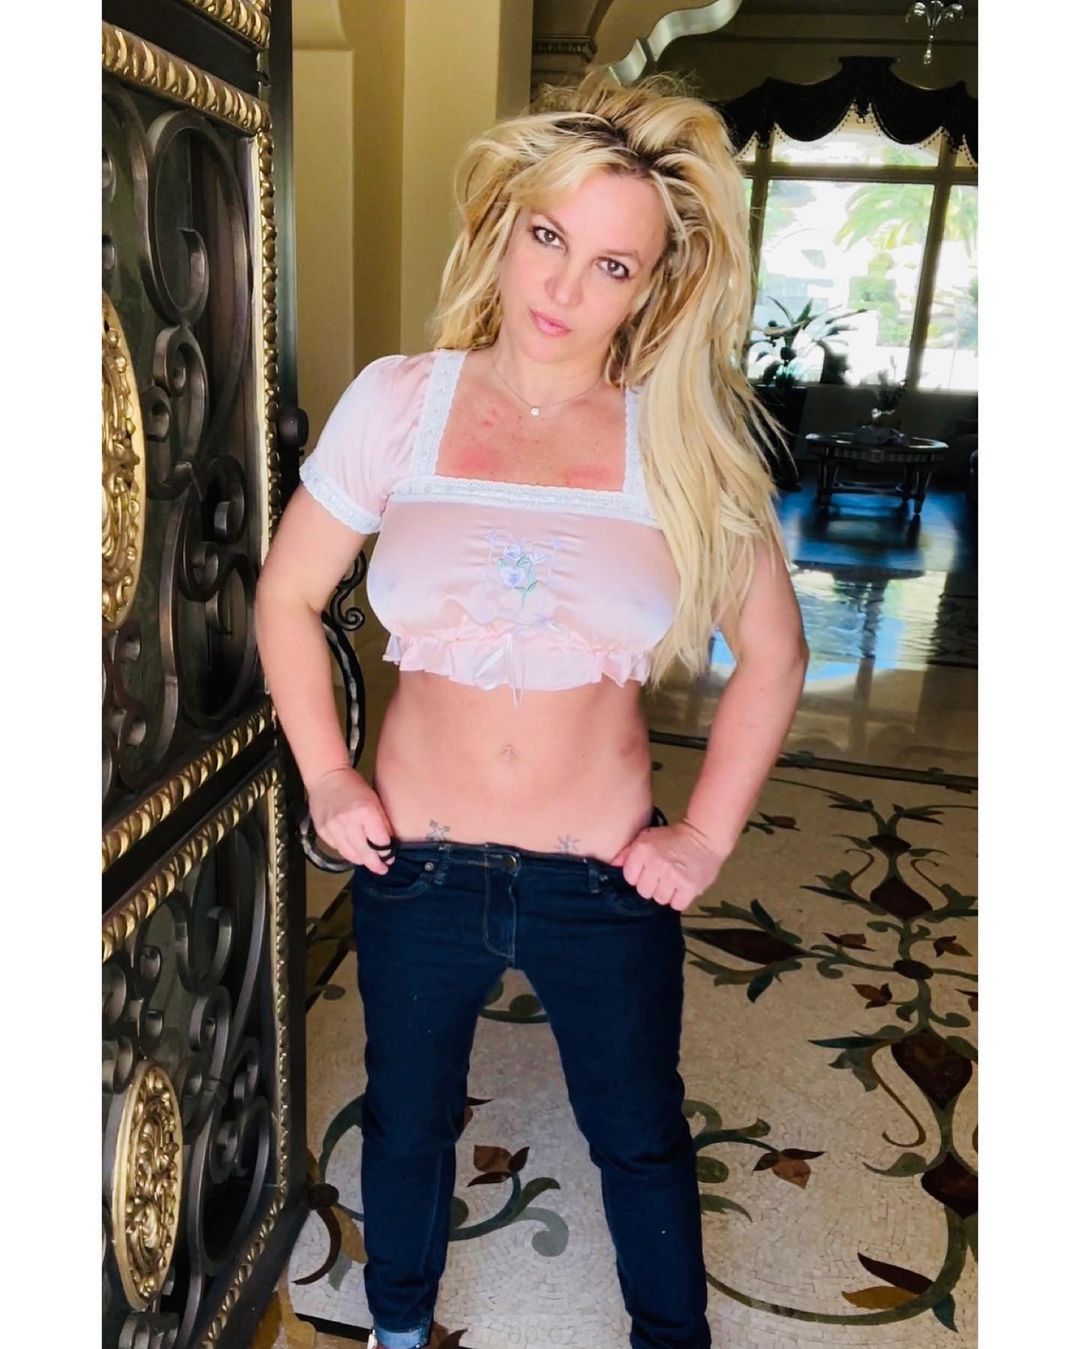 bjorn wilson recommends Britney Spears Big Boobs